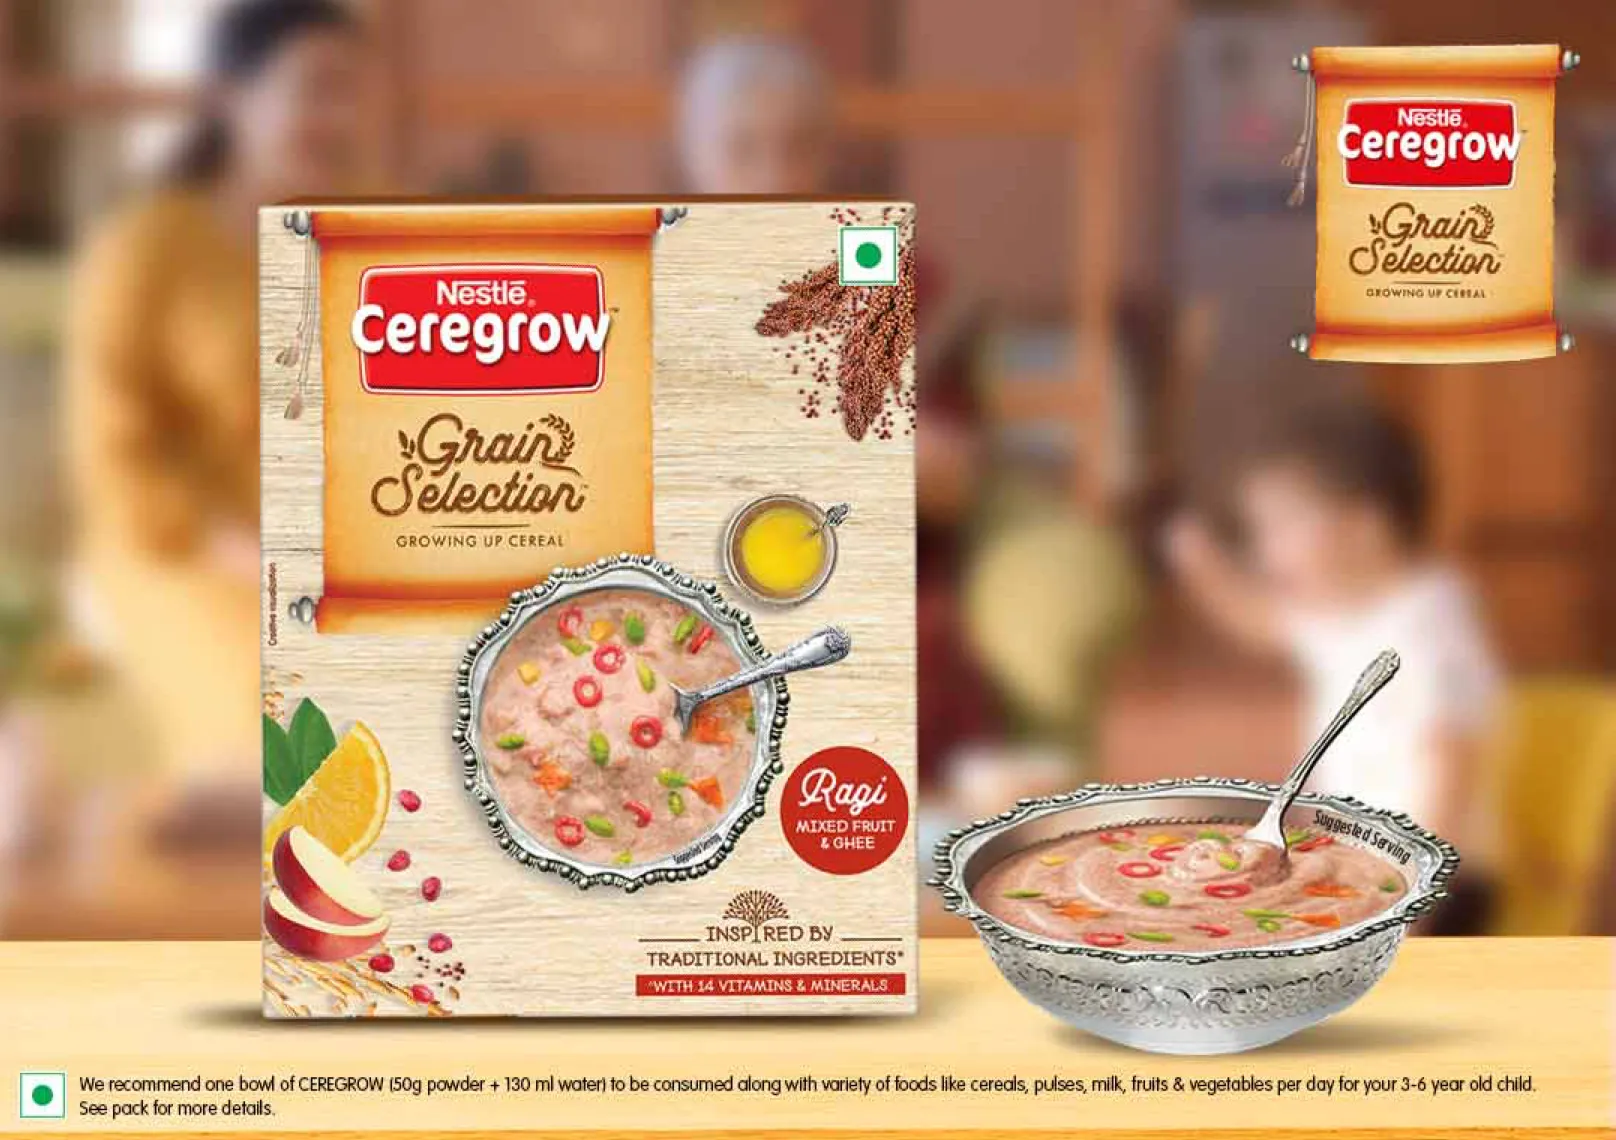 Nestle Ceregrow Grain Selection Cereal Free Sample